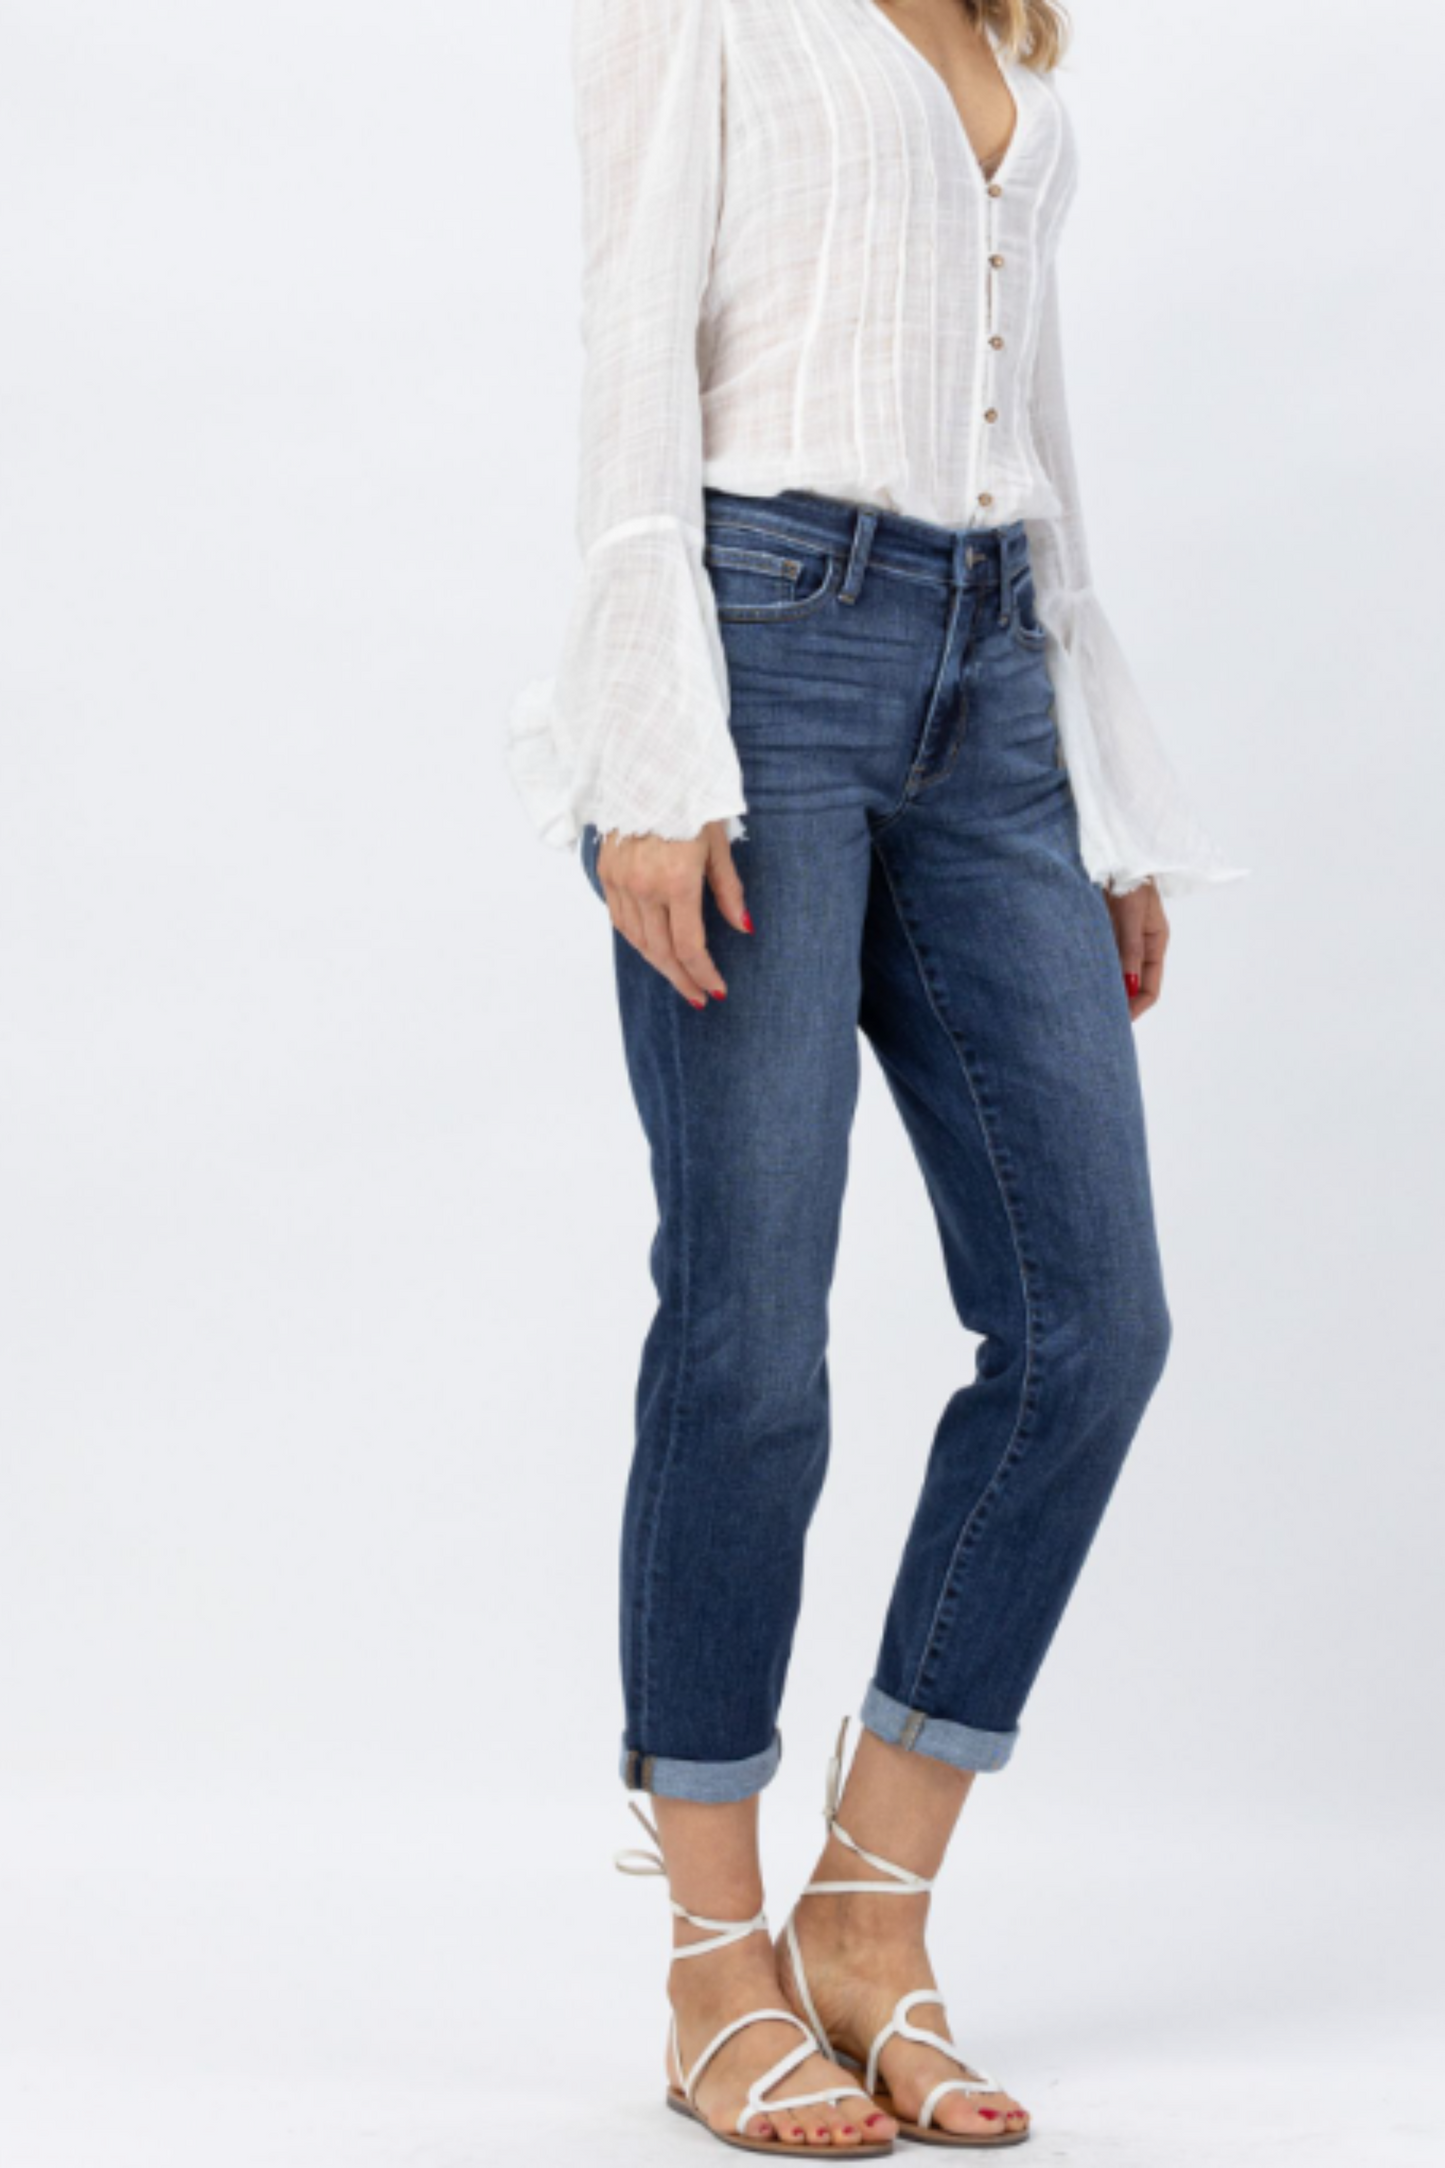 Judy Blue Boyfriend Jeans - Simply Polished Boutique